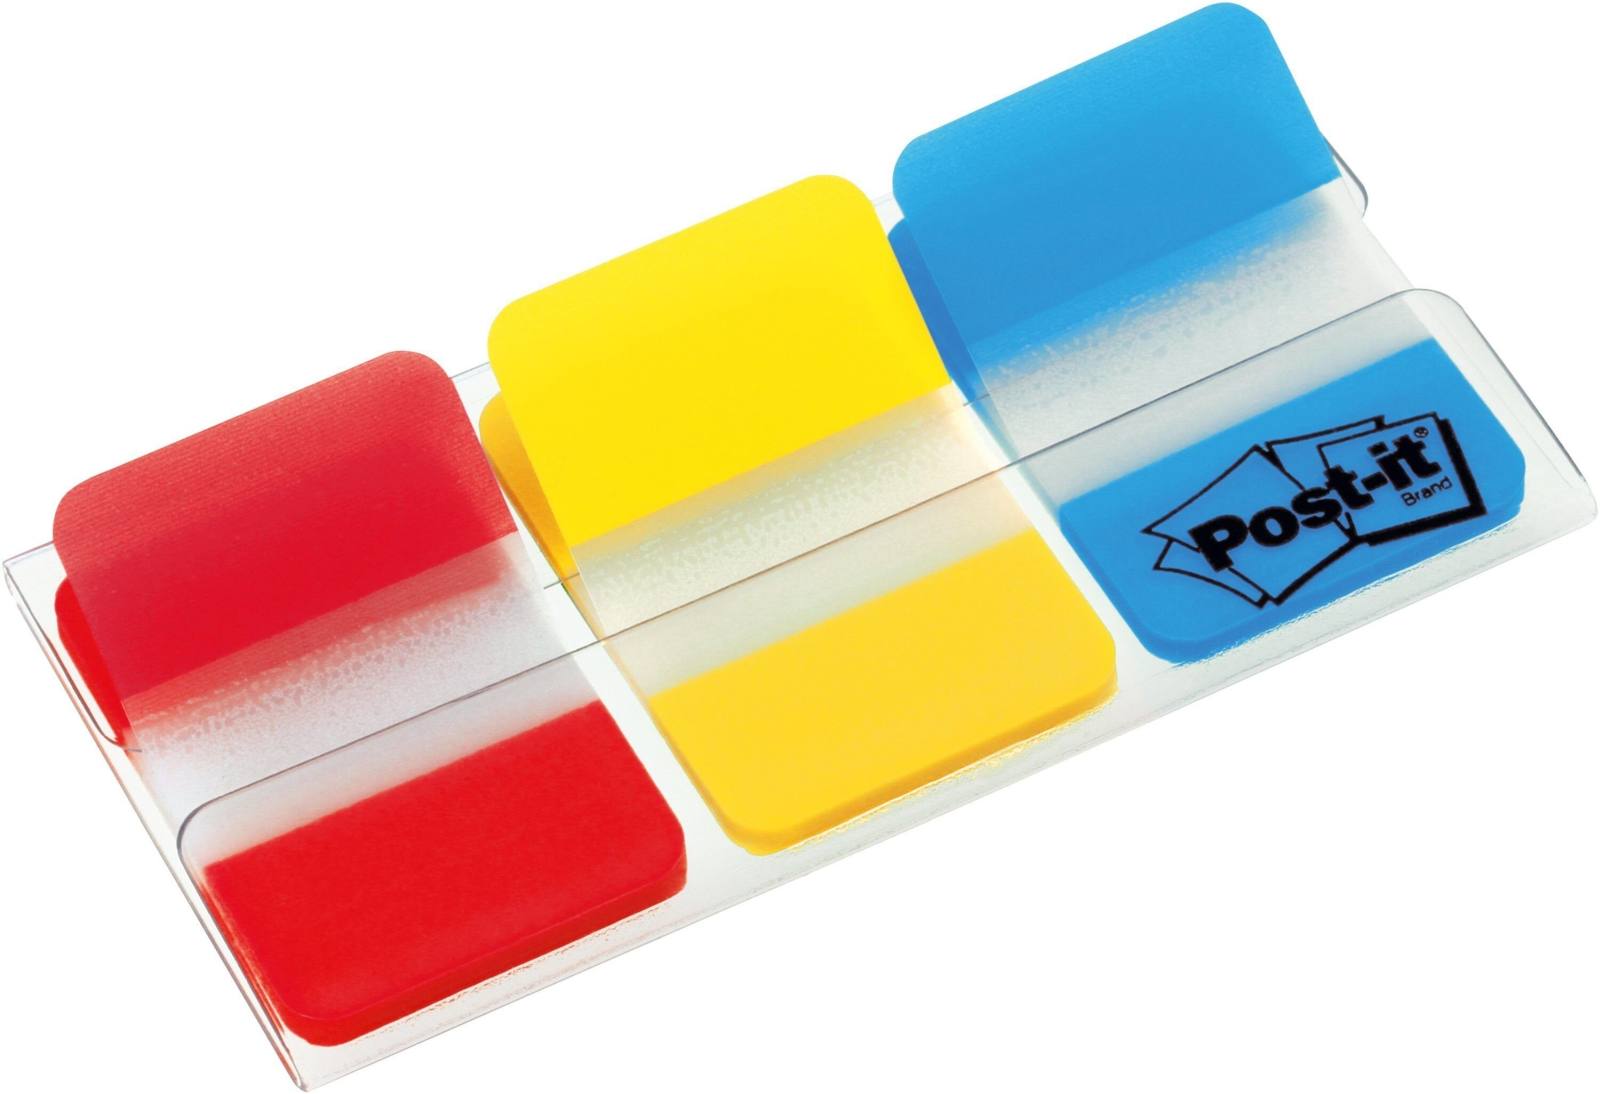 3M Post-it Indice Forte 686-RYB, 25,4 mm x 38 mm, blu, giallo, rosso, 3 x 22 strisce adesive